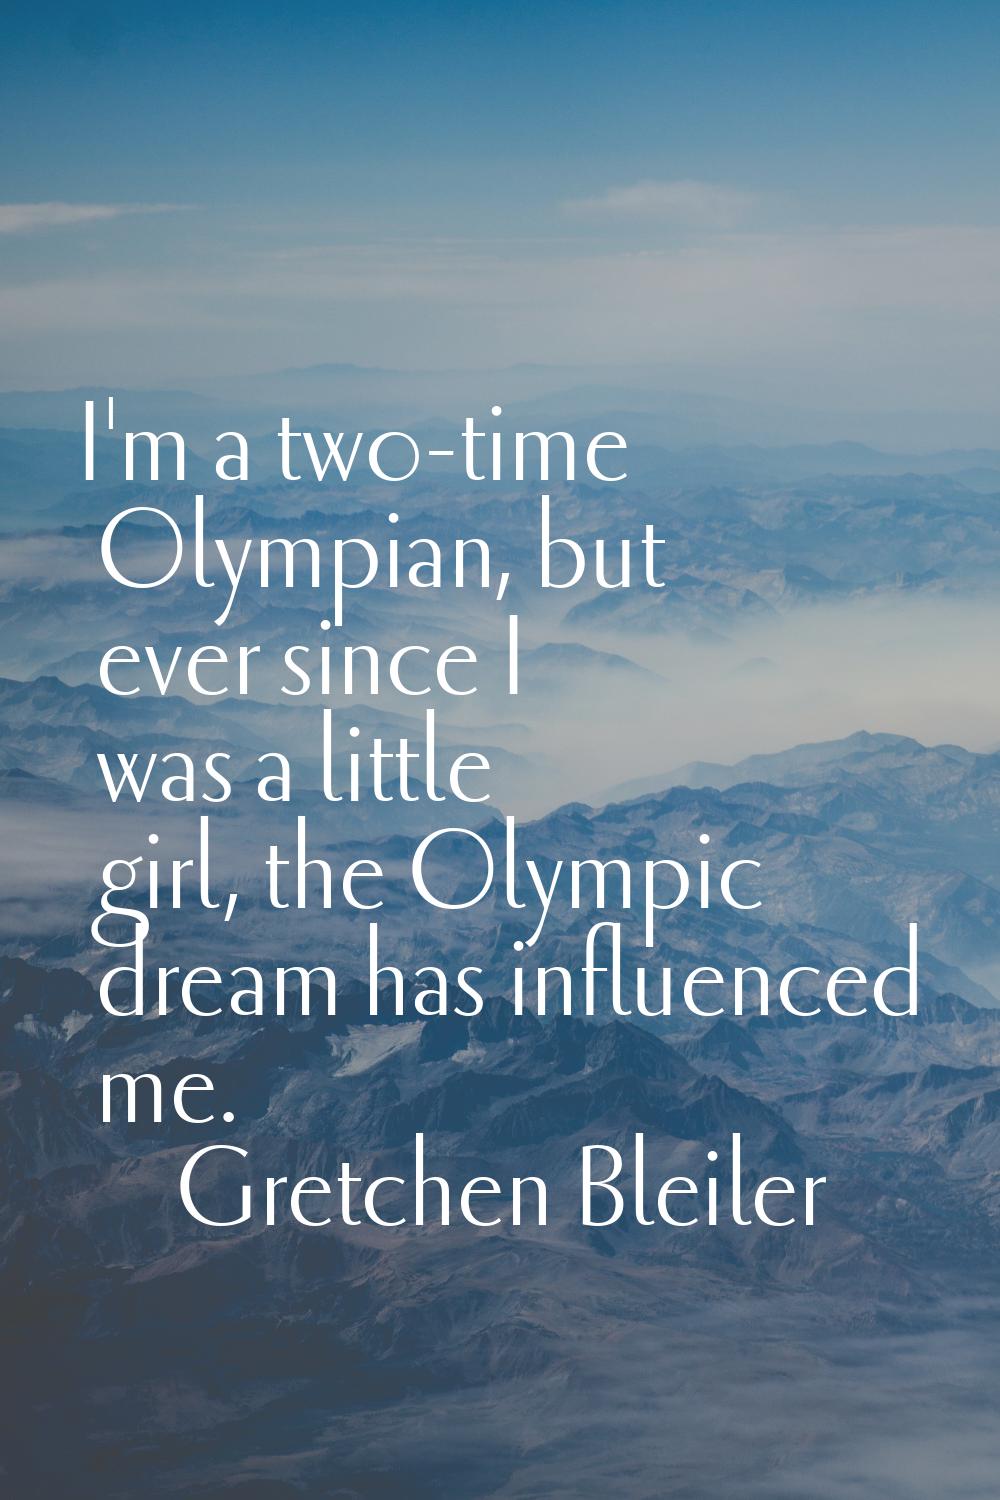 I'm a two-time Olympian, but ever since I was a little girl, the Olympic dream has influenced me.